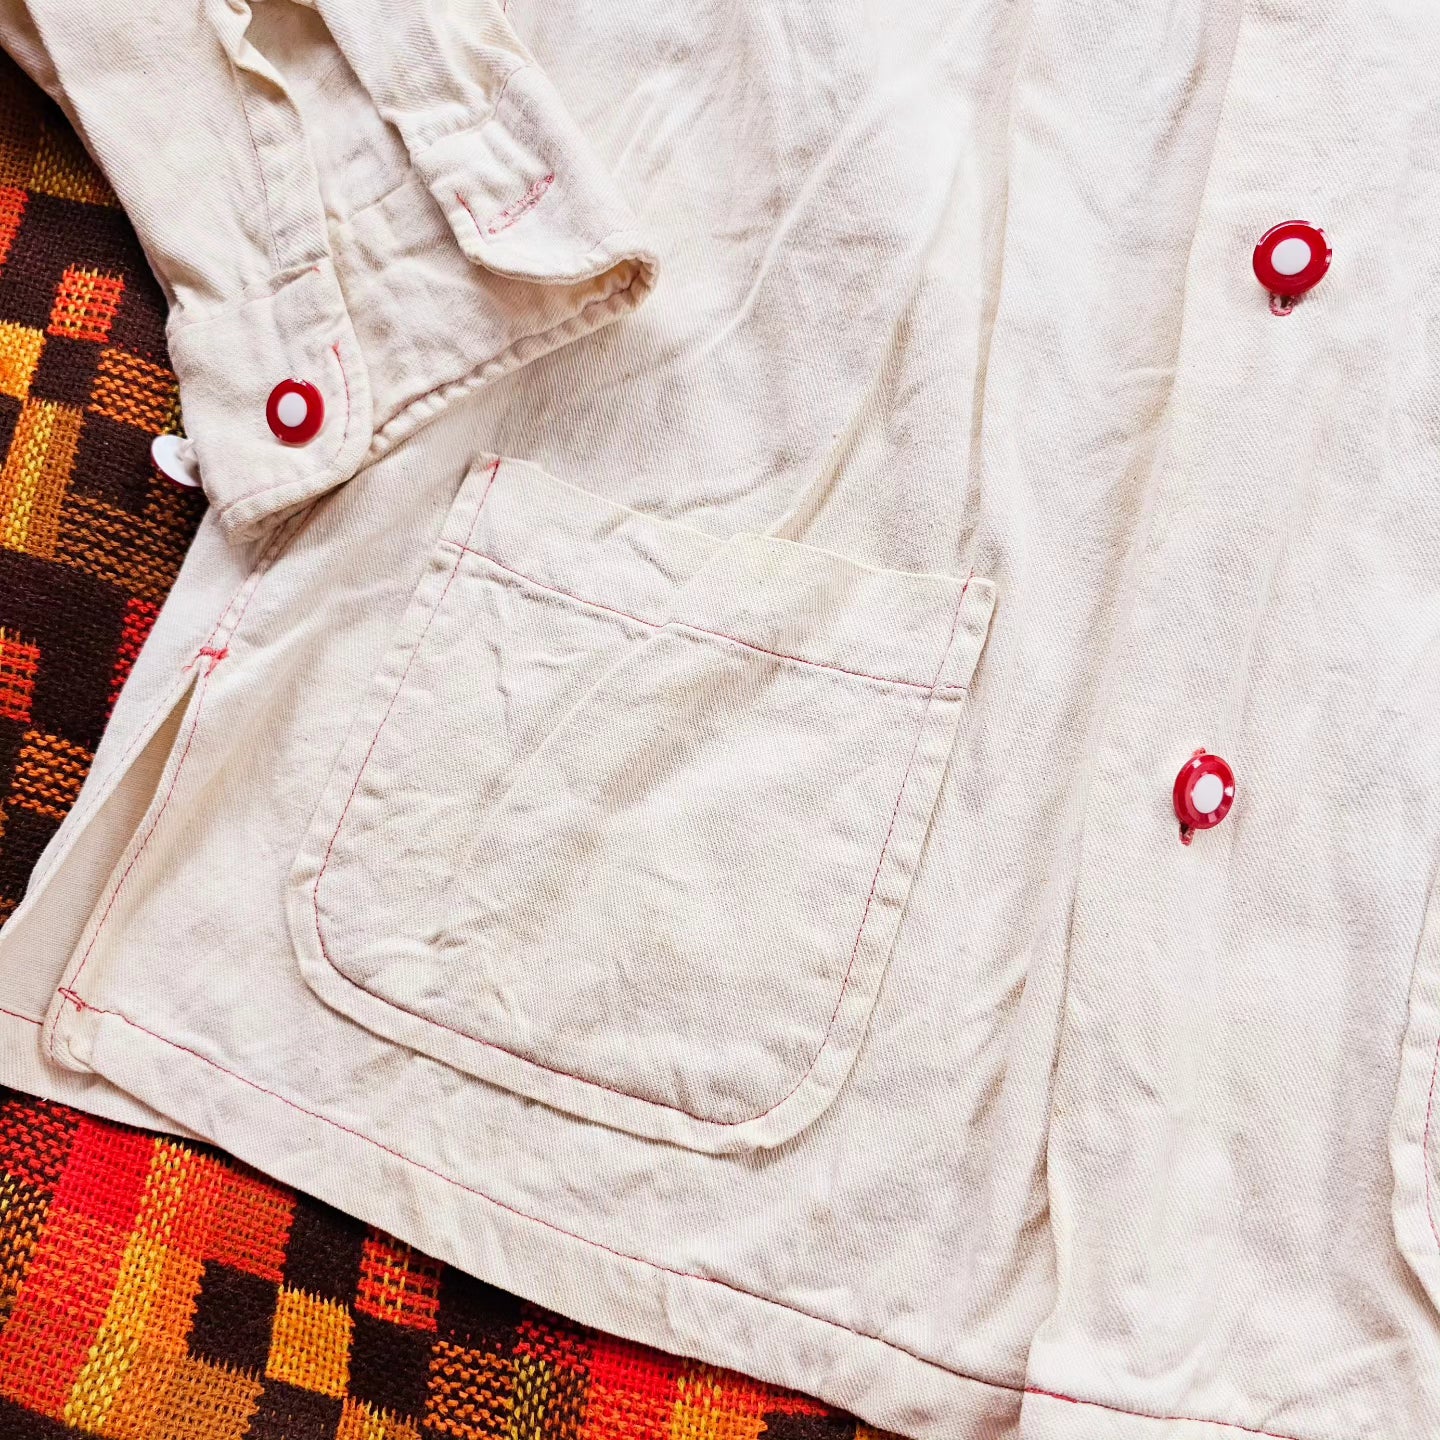 1950s/1960s White & Red button down